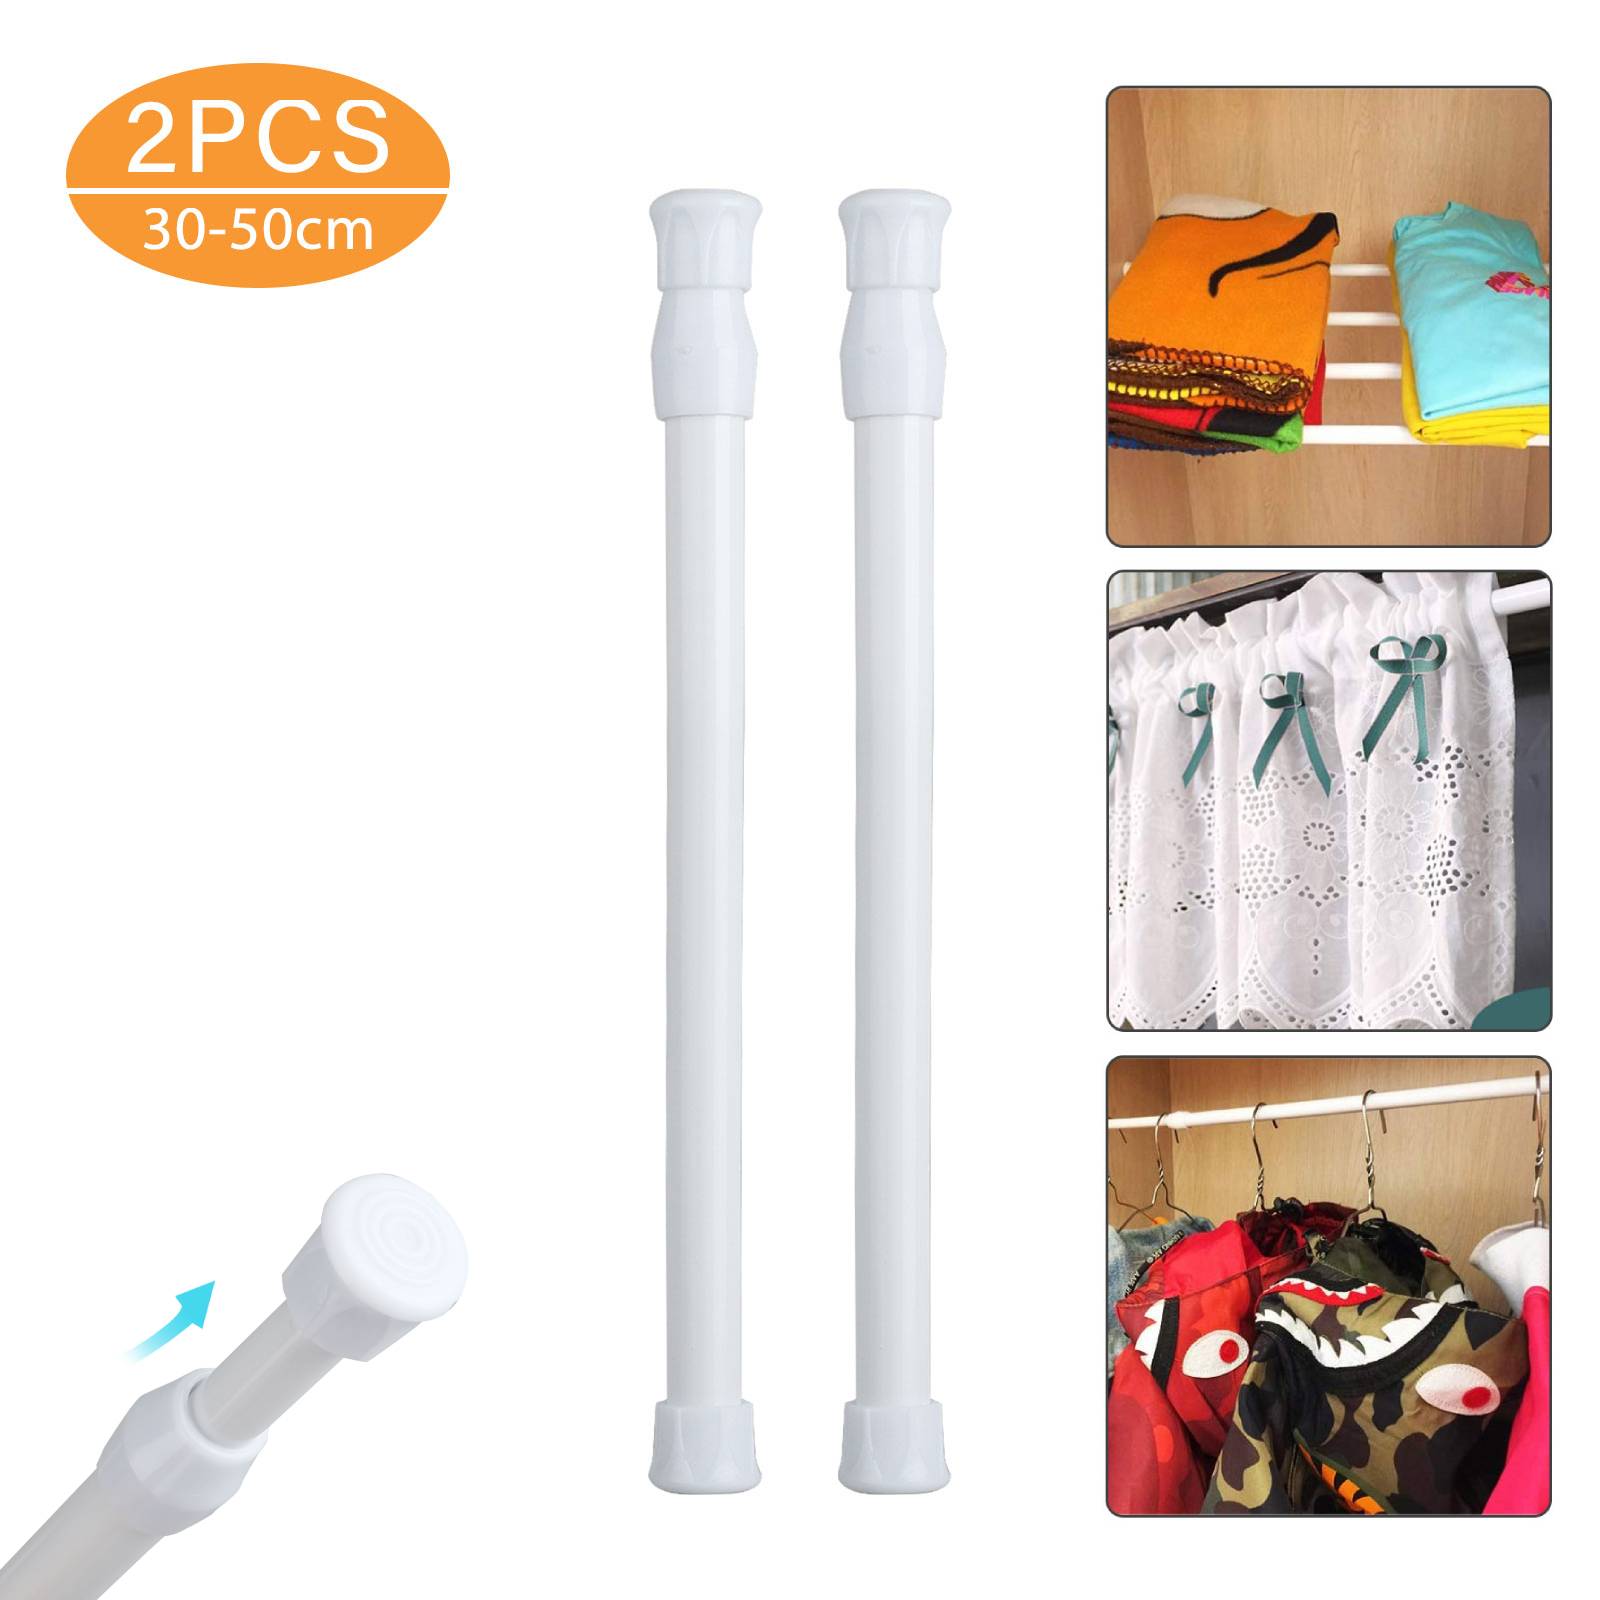 2 Spring Loaded Heavy Duty Tension Curtain Rods Pole Adjustable Width 25-50cm 